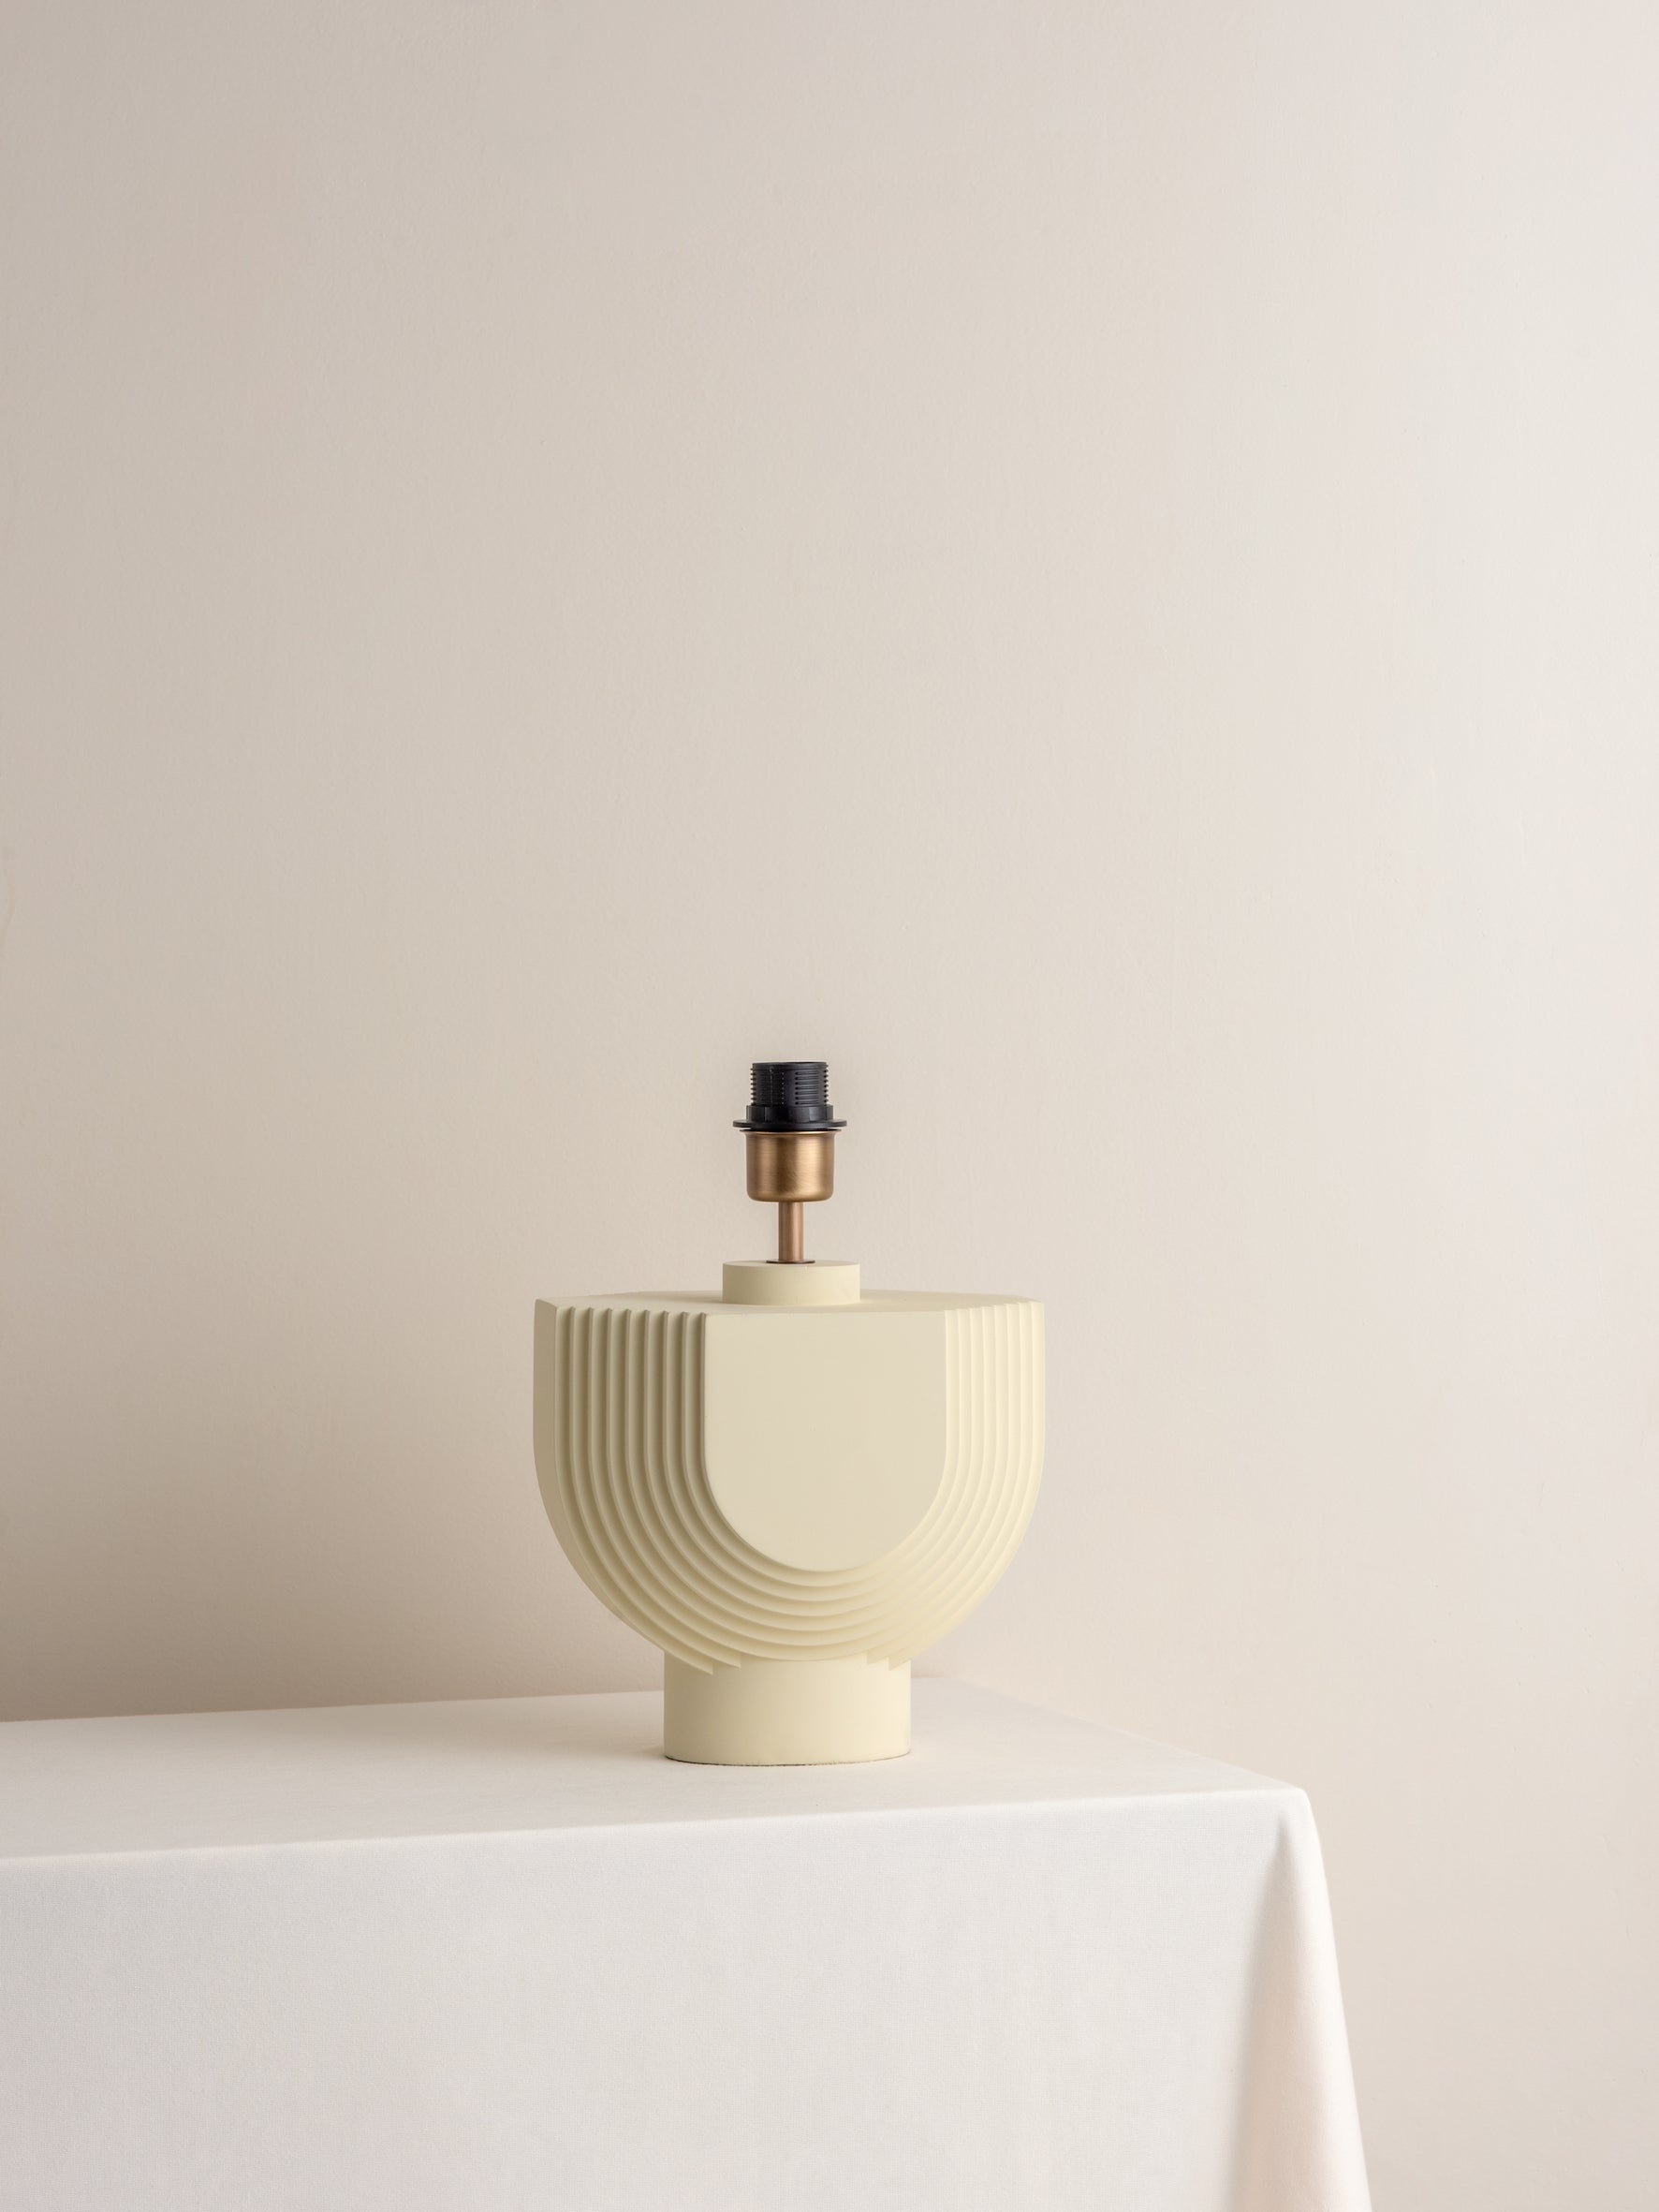 Editions concrete lamp with + chrome shade | Table Lamp | Lights & Lamps | UK | Modern Affordable Designer Lighting